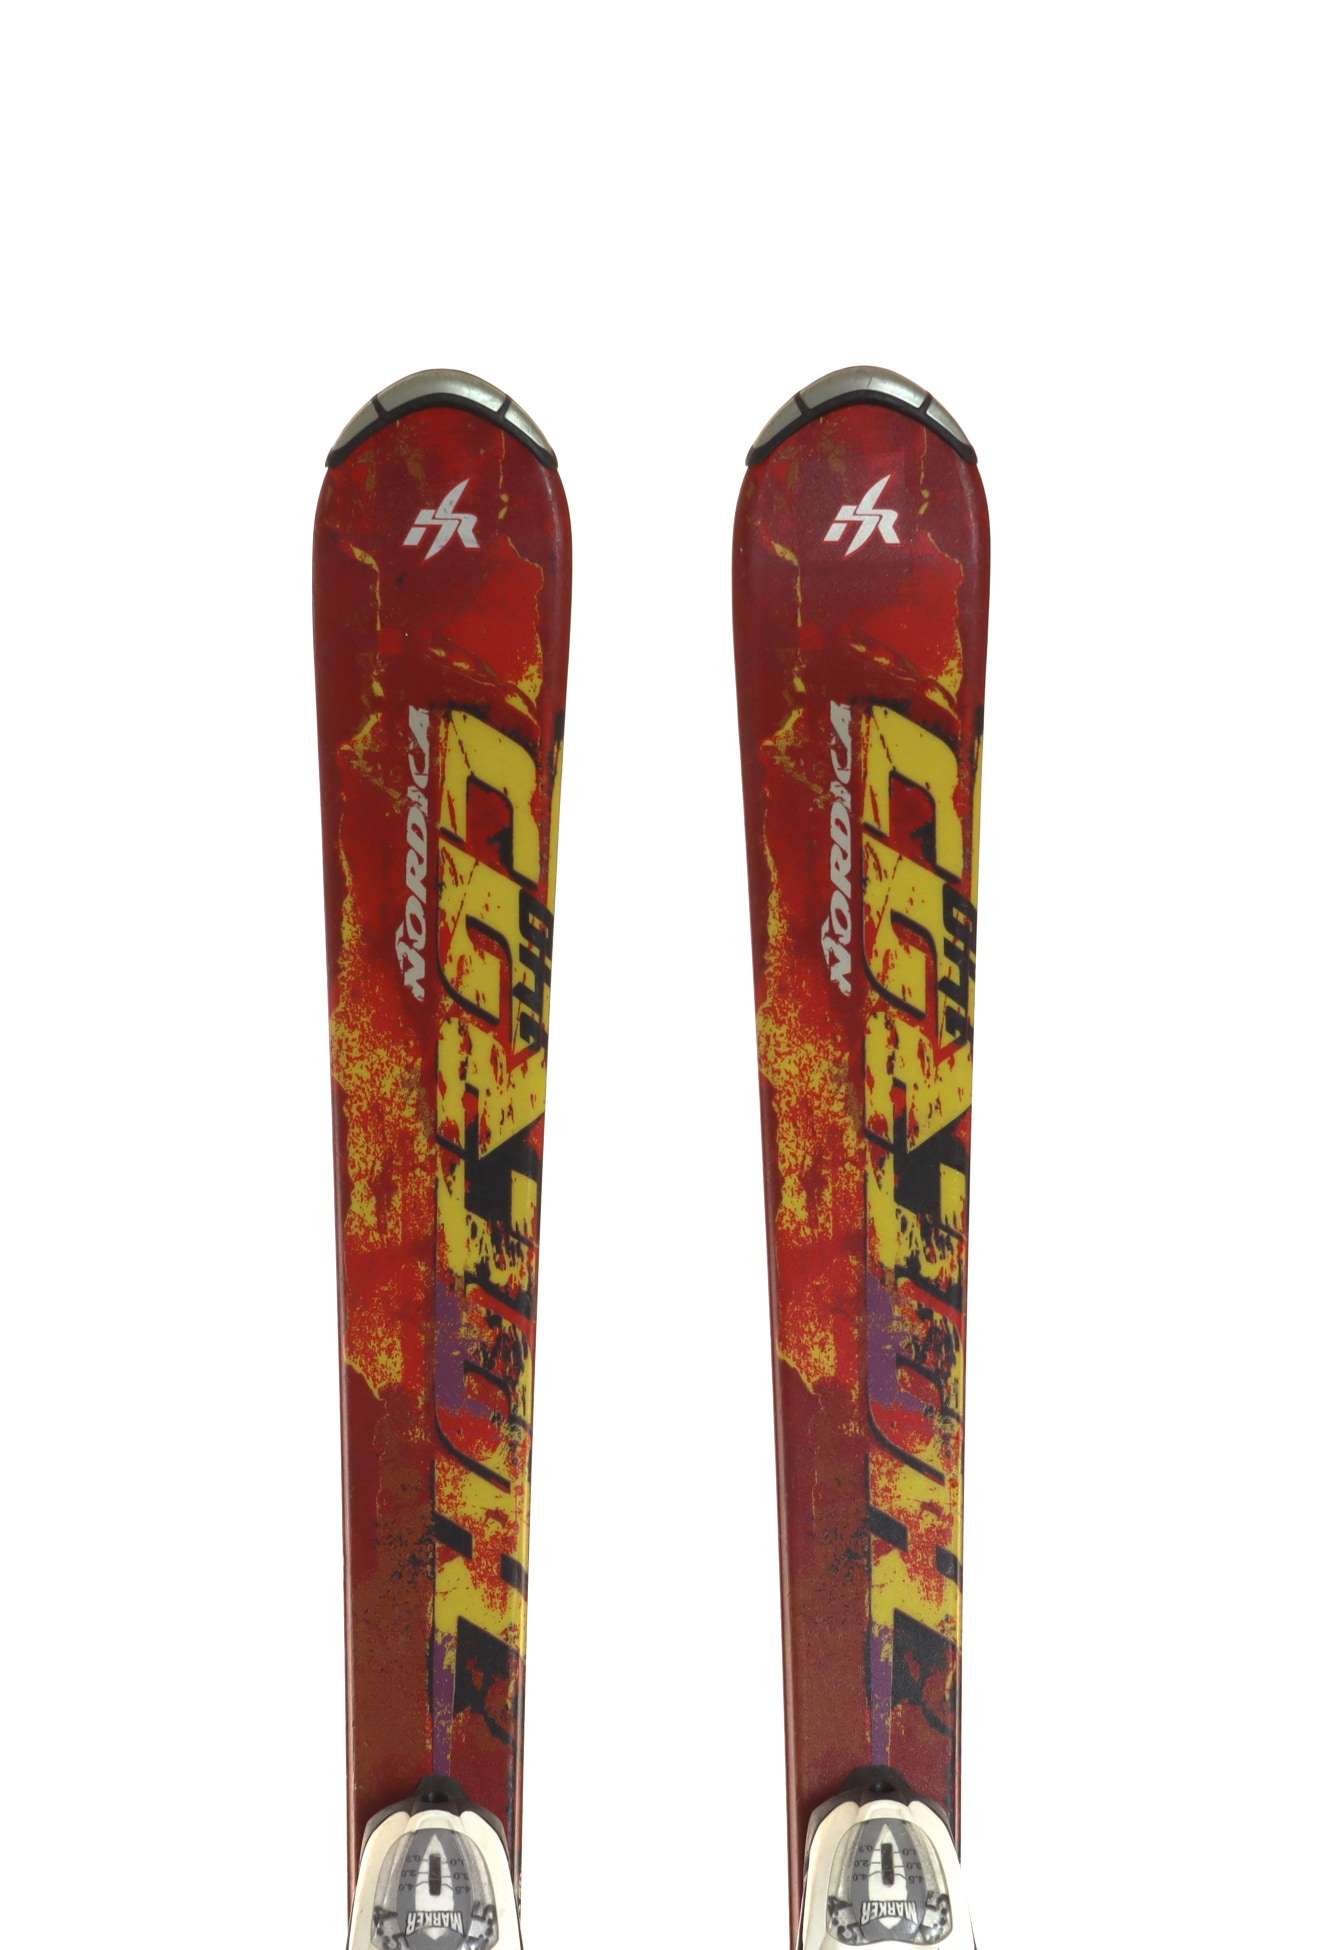 Used 2012 Nordica Hotrod Ski with Marker 4.5 Bindings Size 140 (Option 240097)